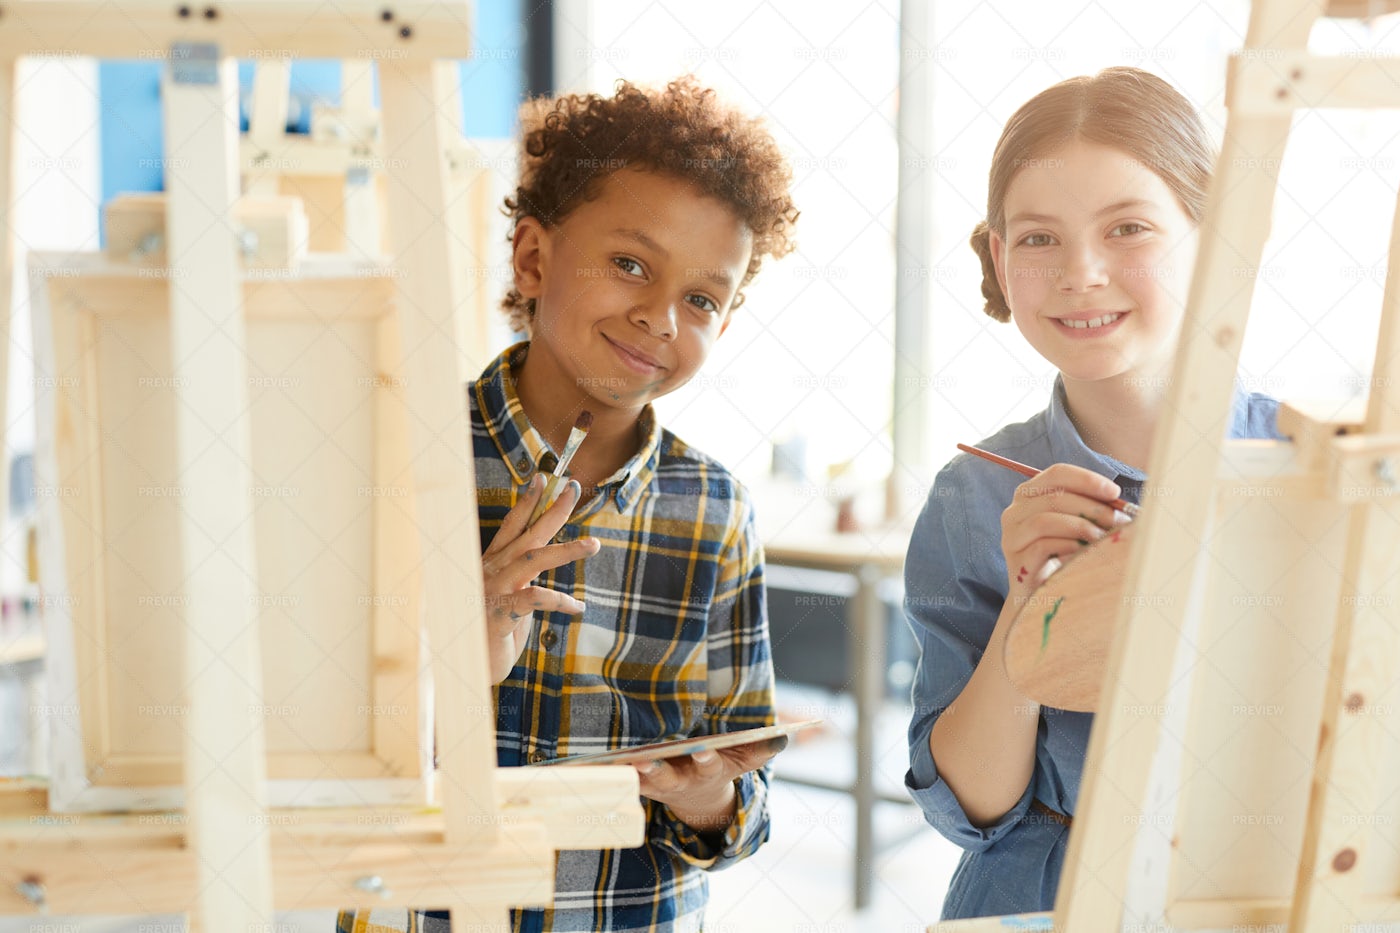 Kids By Easels: Stock Photos